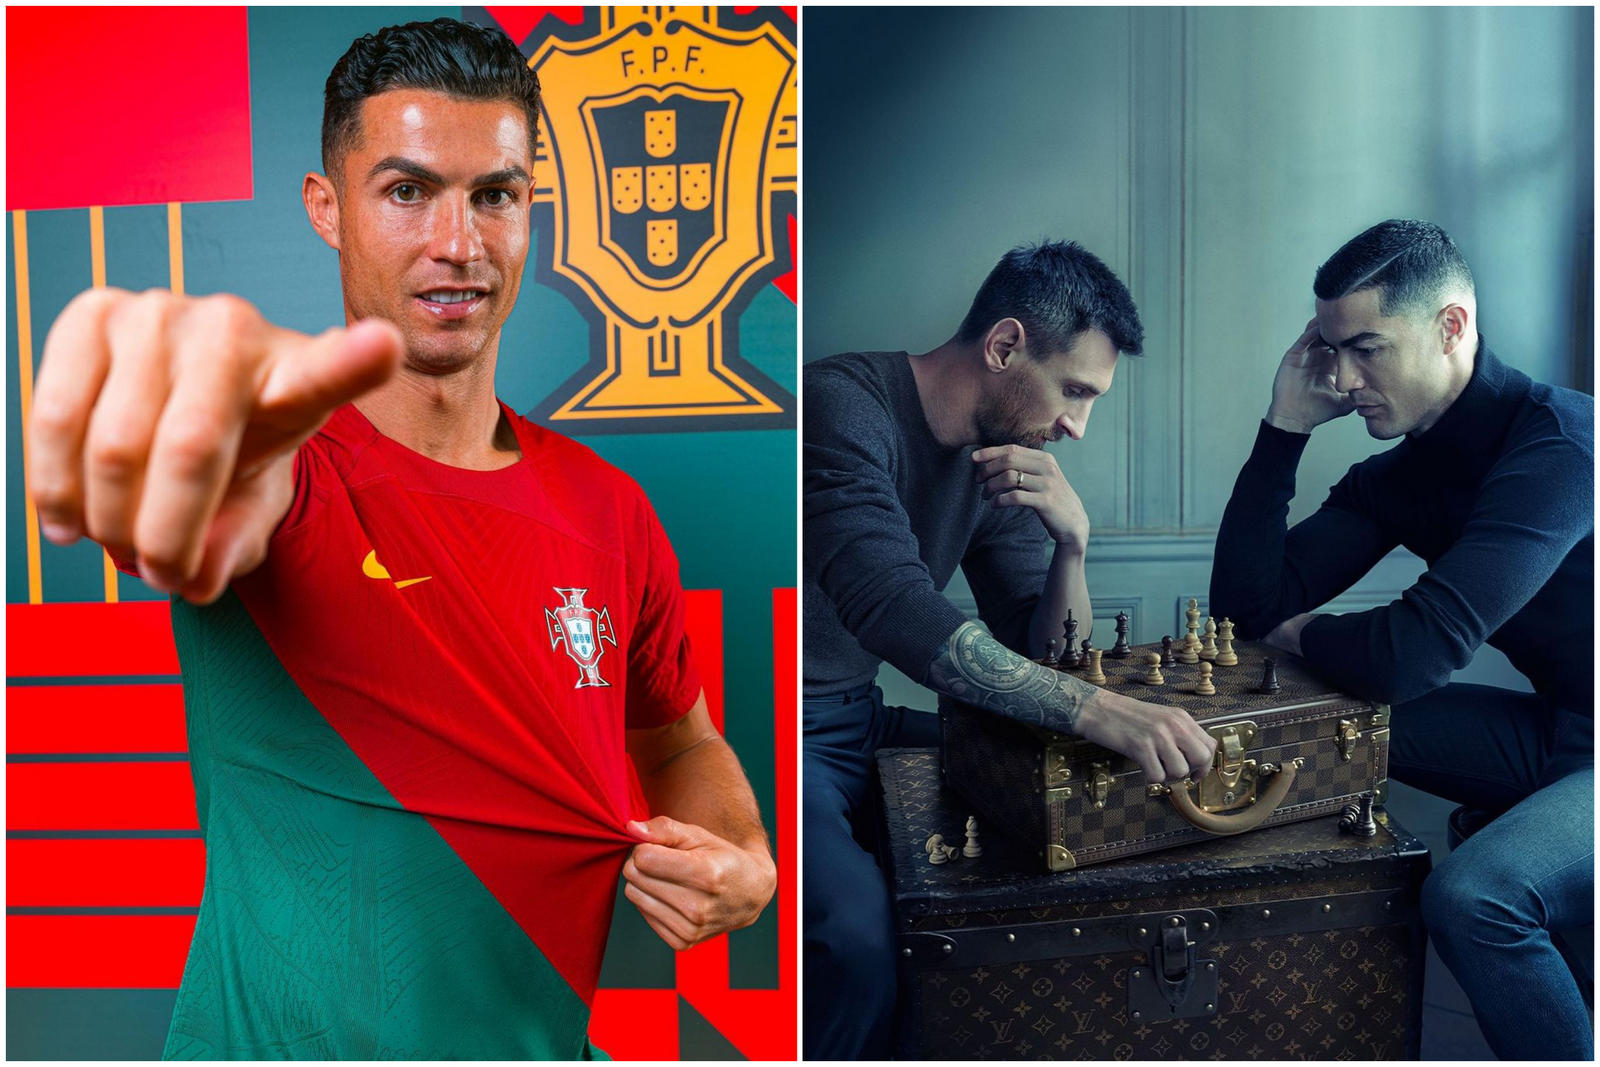 Cristiano Ronaldo becomes the first person to reach 500 million followers  on Instagram - Luxurylaunches